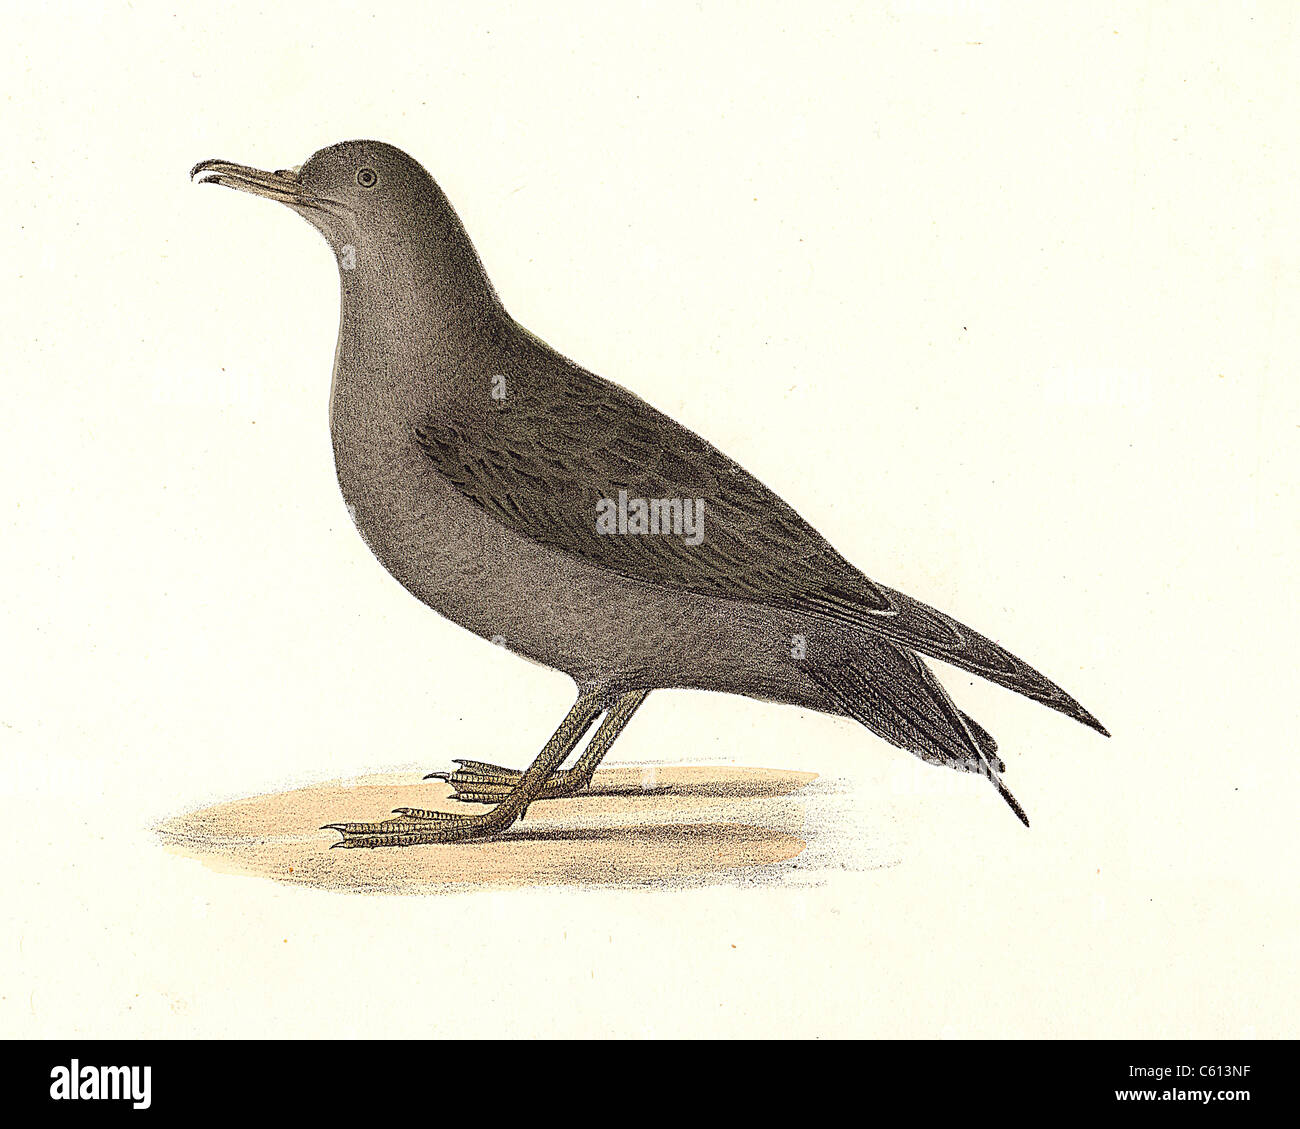 The Large Shearwater, adult, Audubon's Shearwater (Puffinus obscurus, Puffinus lherminieri) vintage bird lithograph - James De Kay, NY Zoology Birds Stock Photo